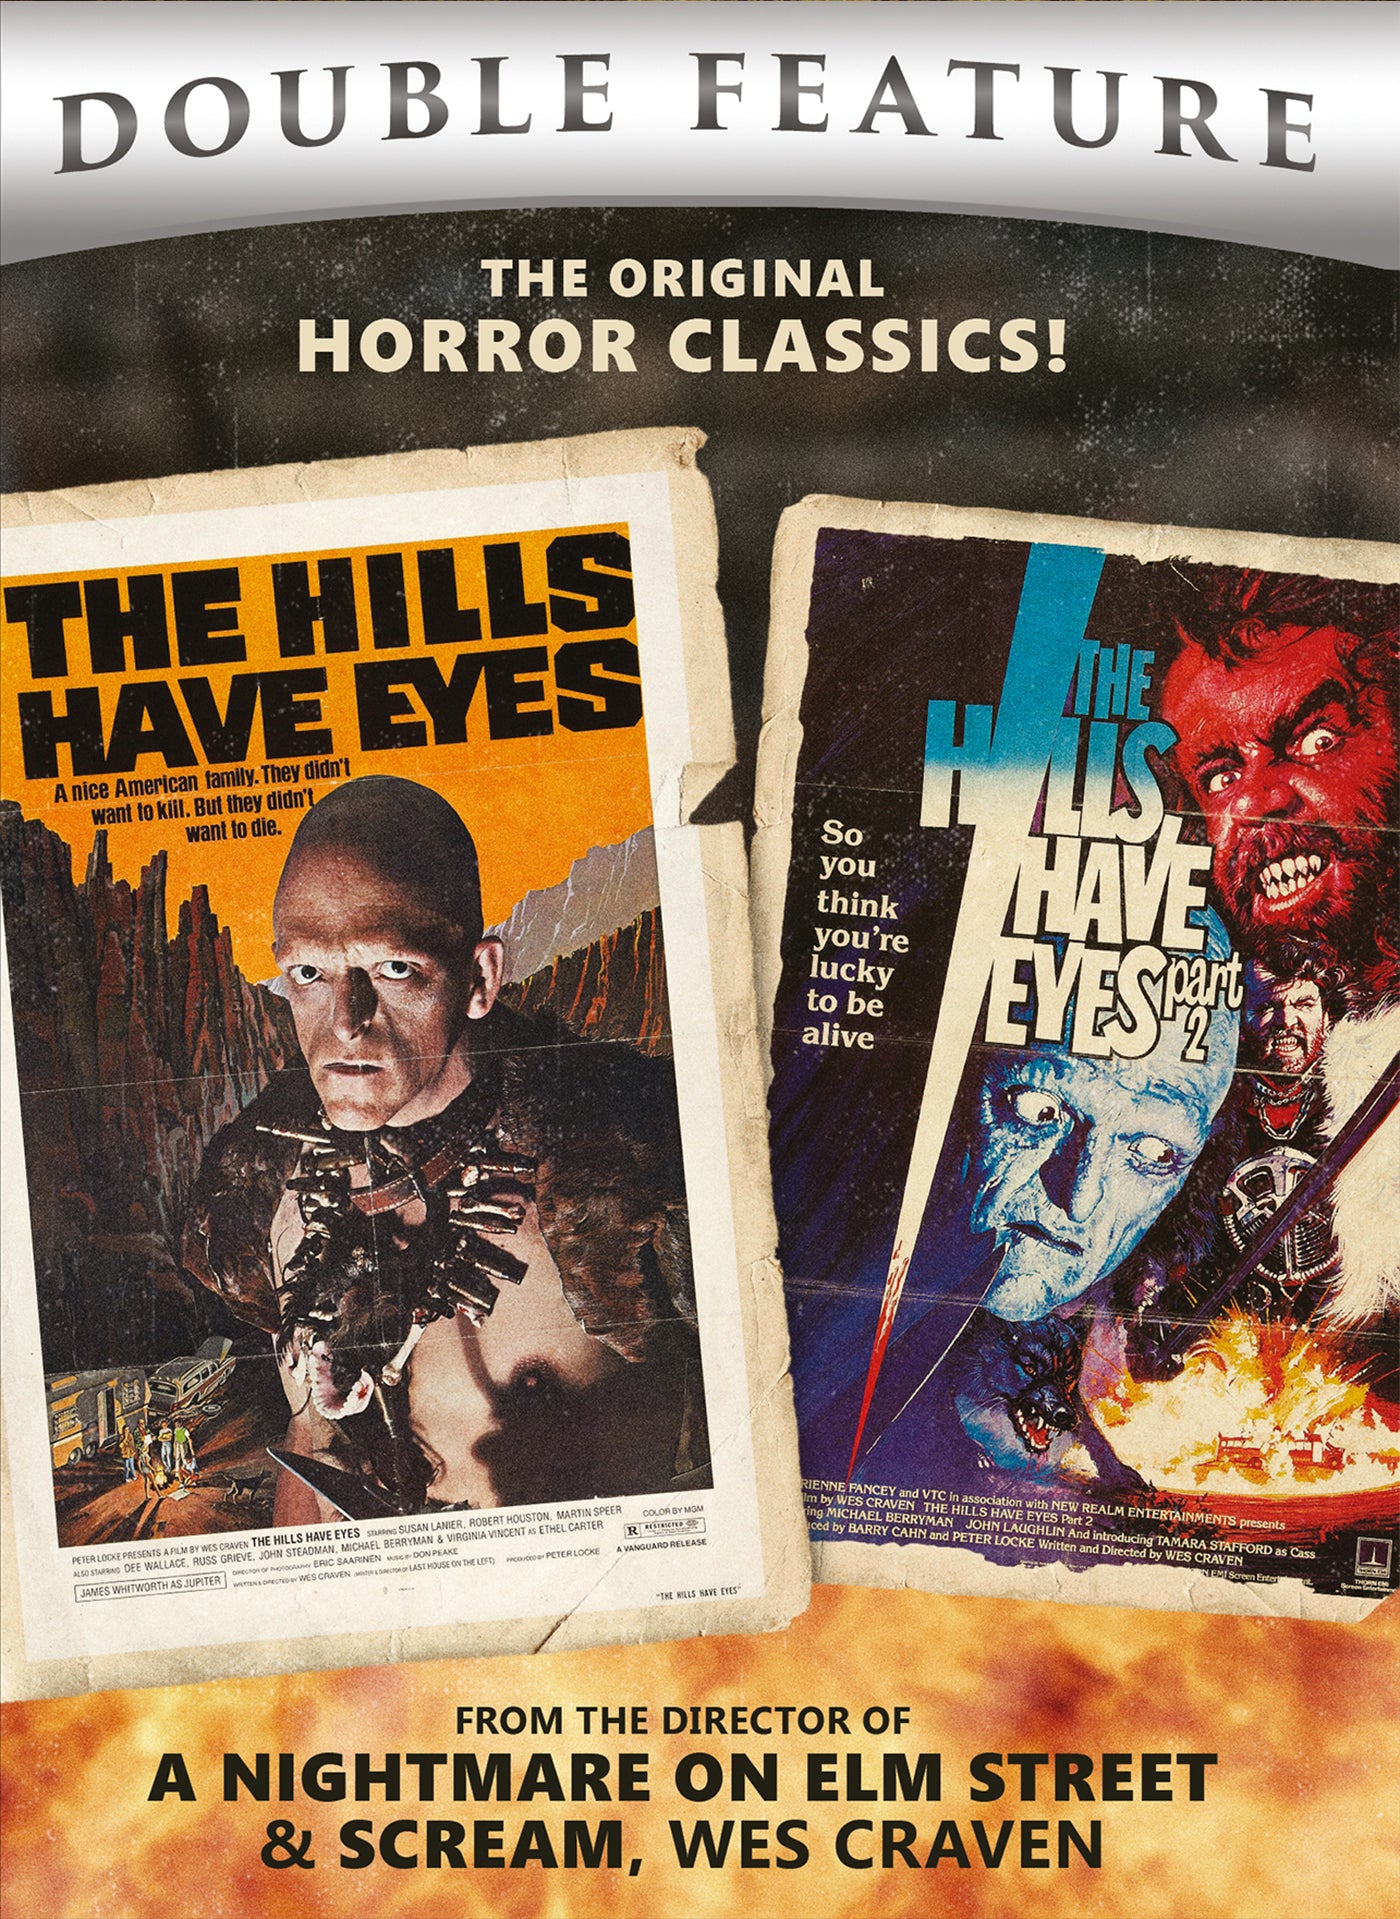 THE HILLS HAVE EYES DOUBLE FEATURE DVD